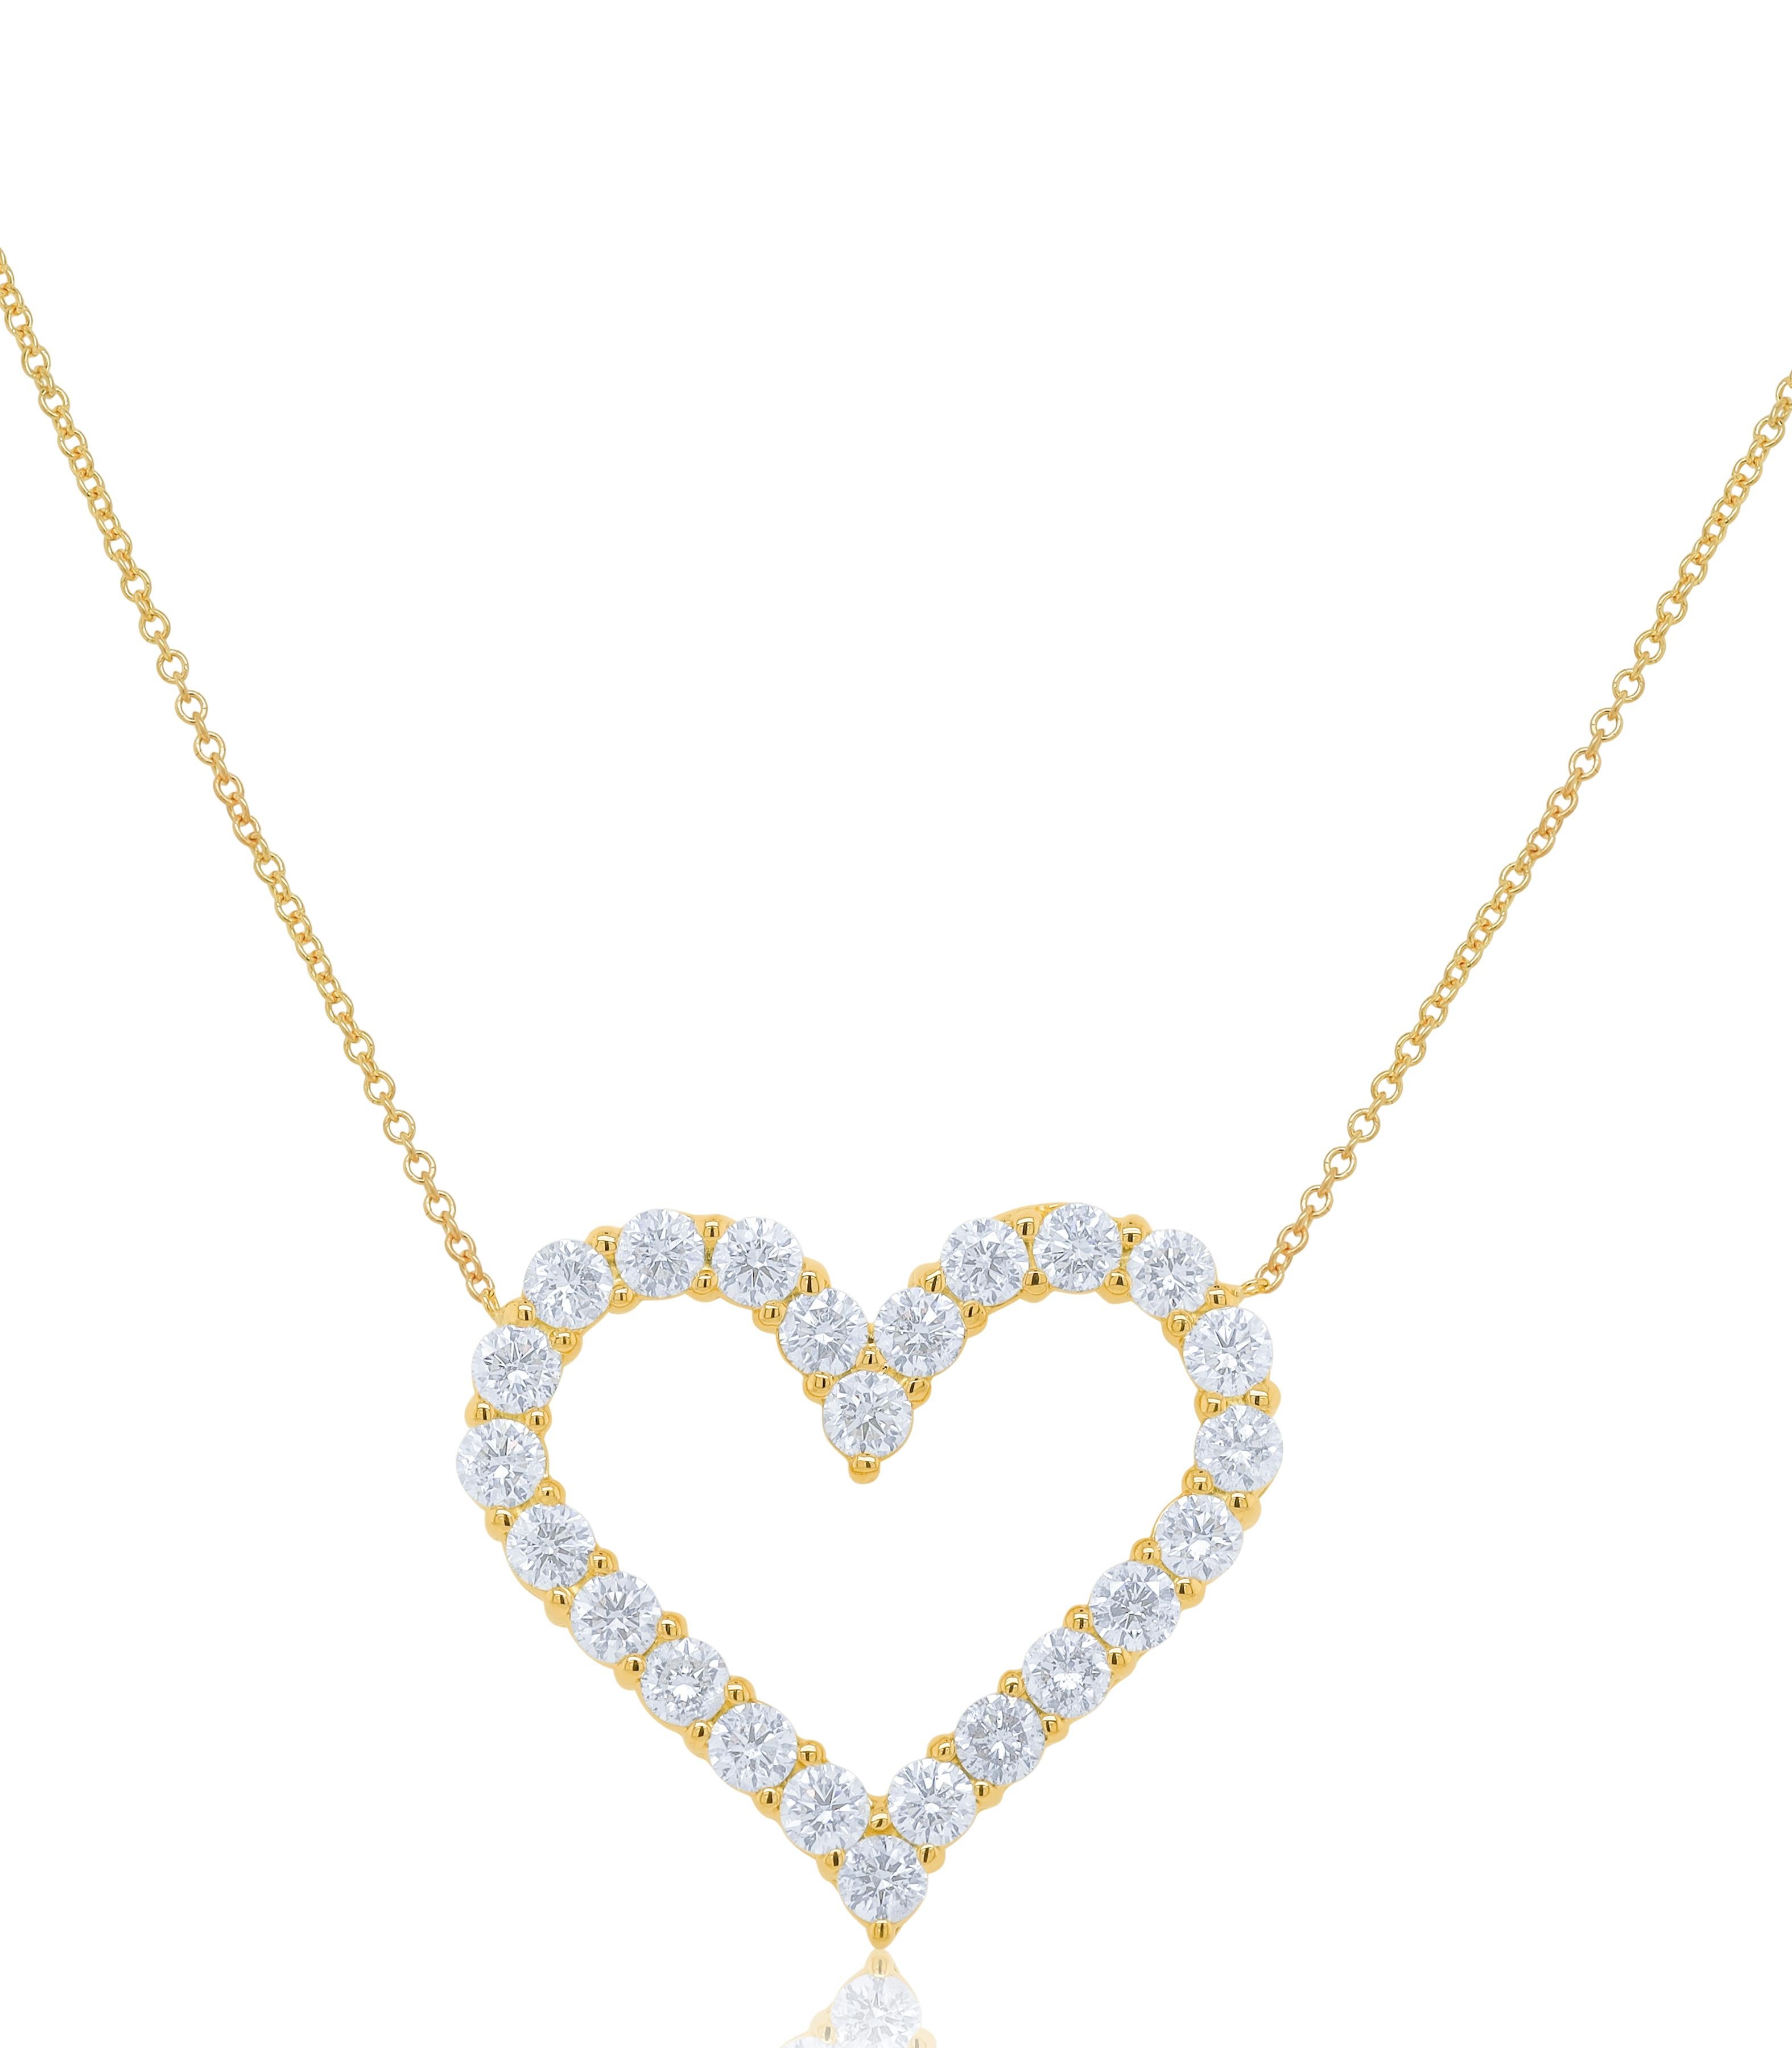 18kt yellow gold open heart pendant featuring 2.50 cts of round diamonds,24 stones 
Diana M. is a leading supplier of top-quality fine jewelry for over 35 years.
Diana M is one-stop shop for all your jewelry shopping, carrying line of diamond rings,